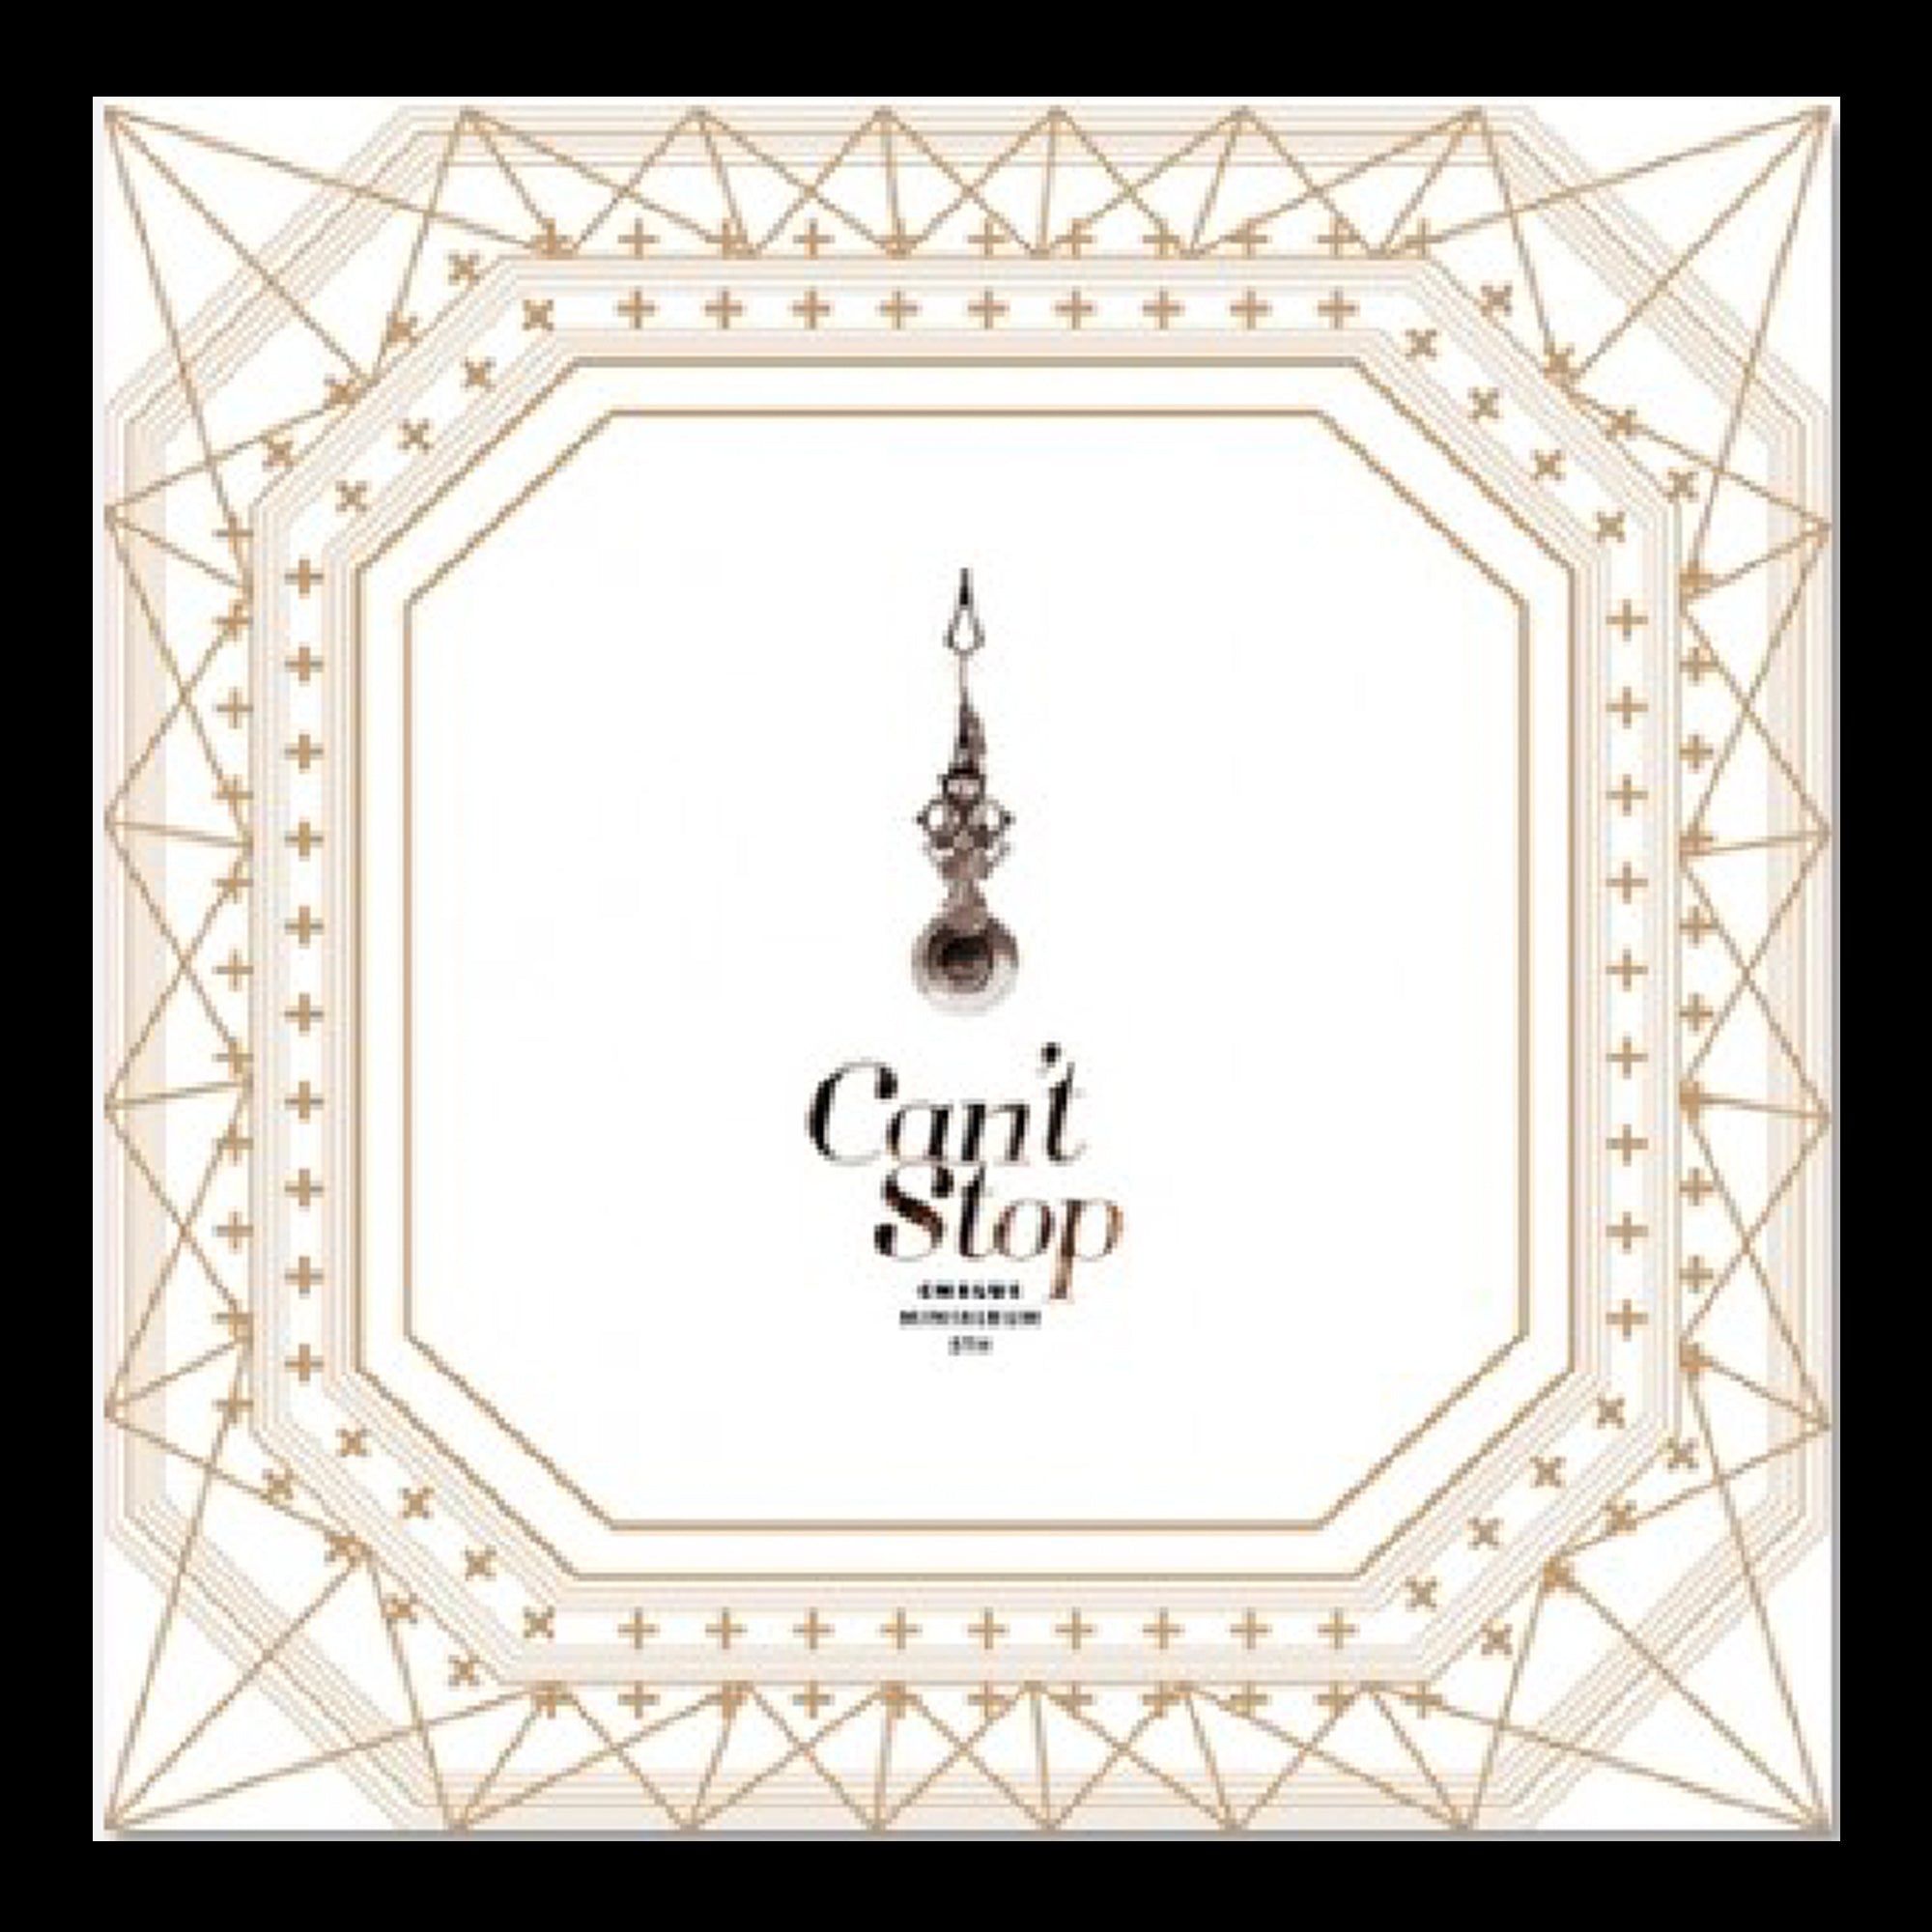 CNBLUE - Can't Stop Ver. Special